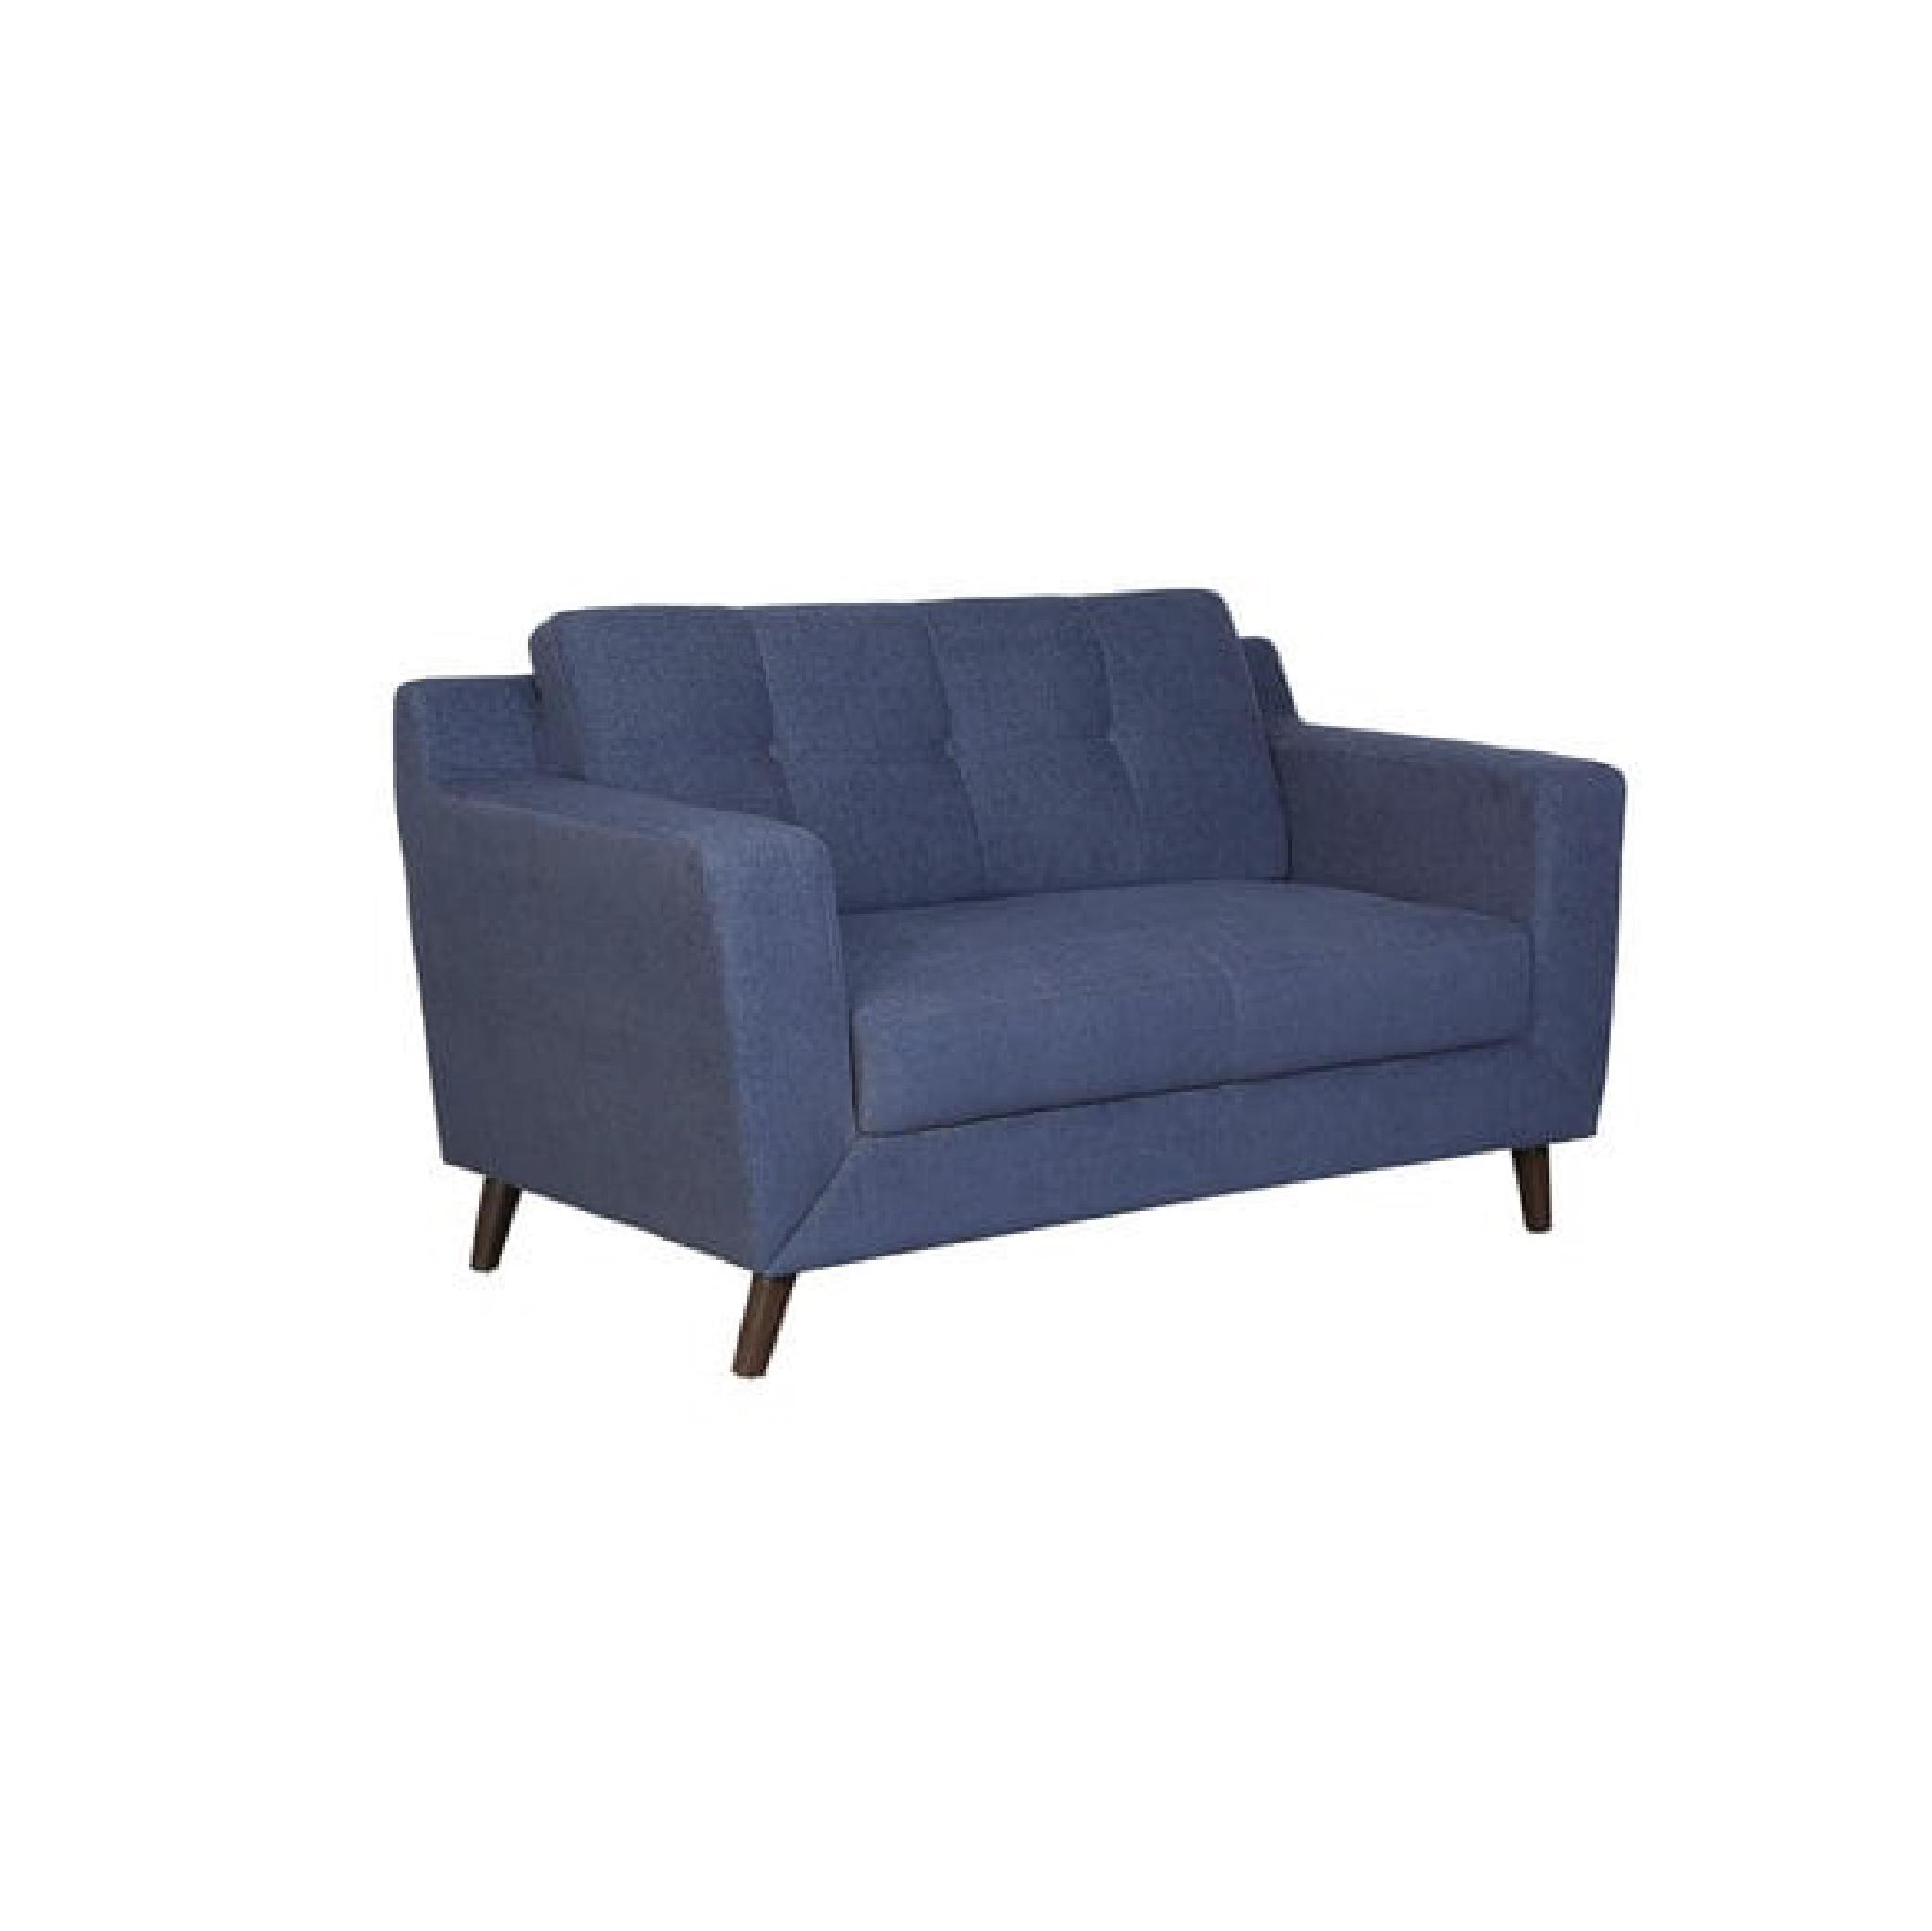 Nocera Two Seater Sofa in Navy Blue Colour